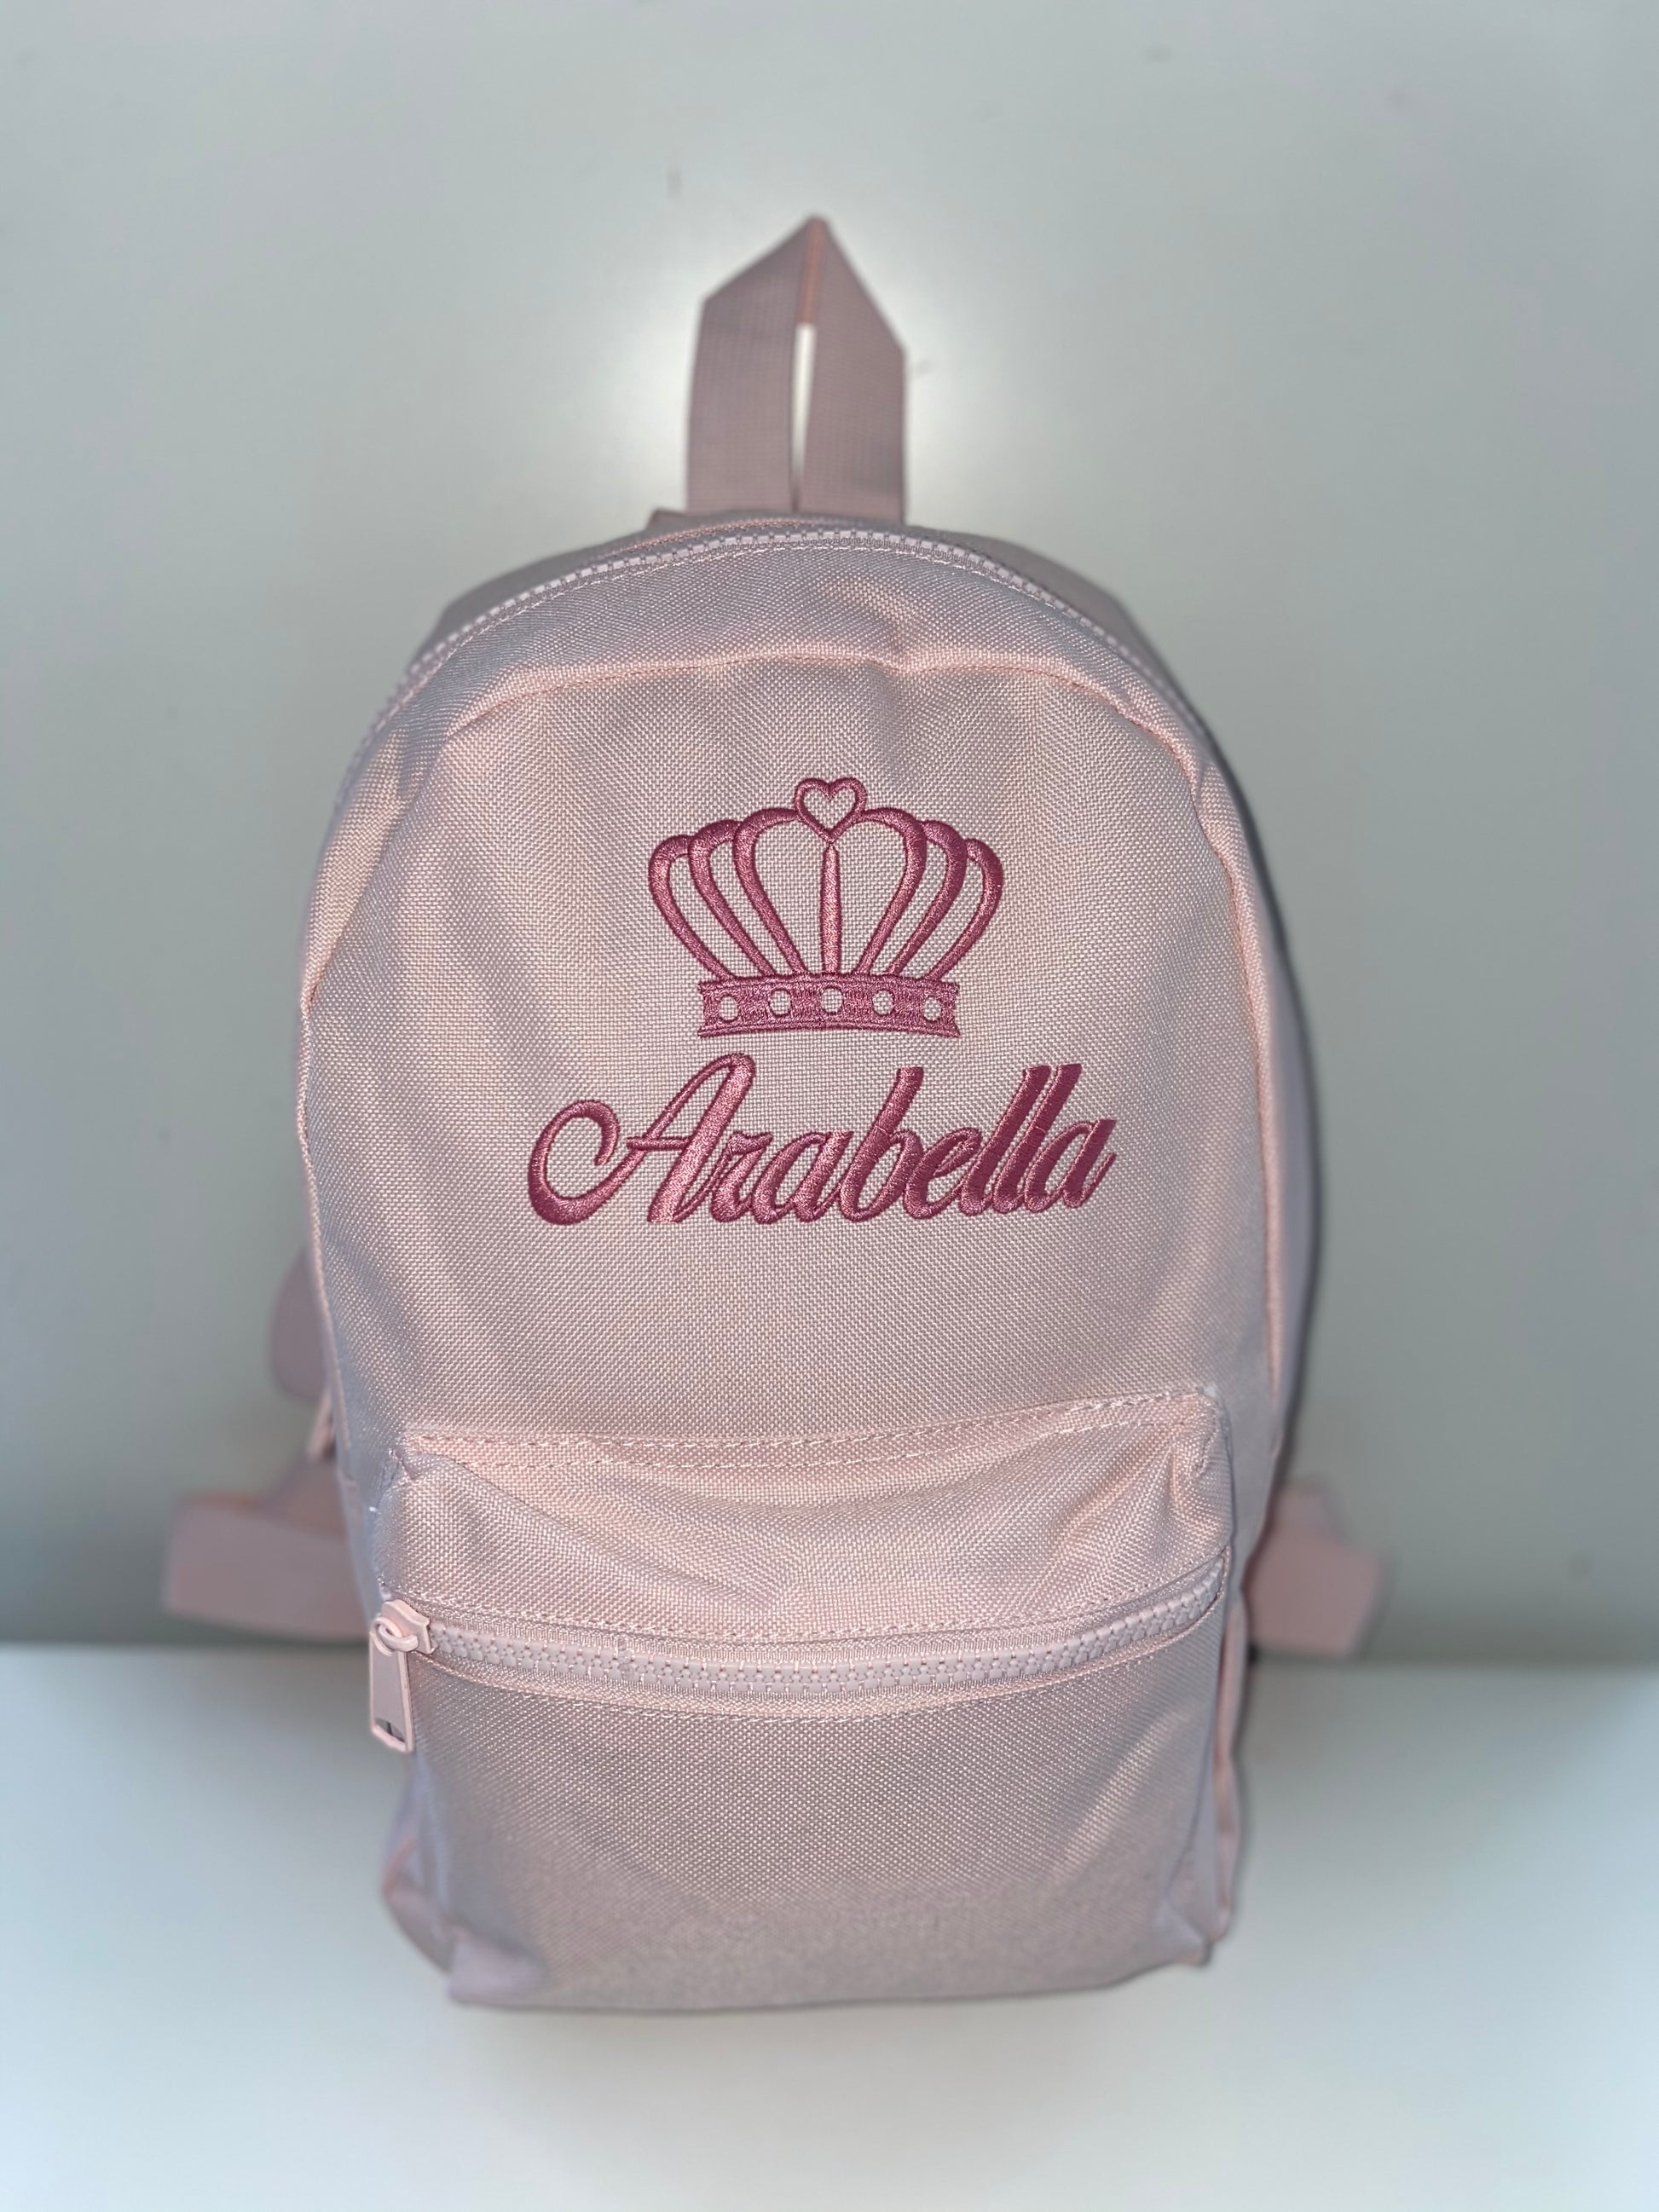 Pink Backpack with Pink Stitching